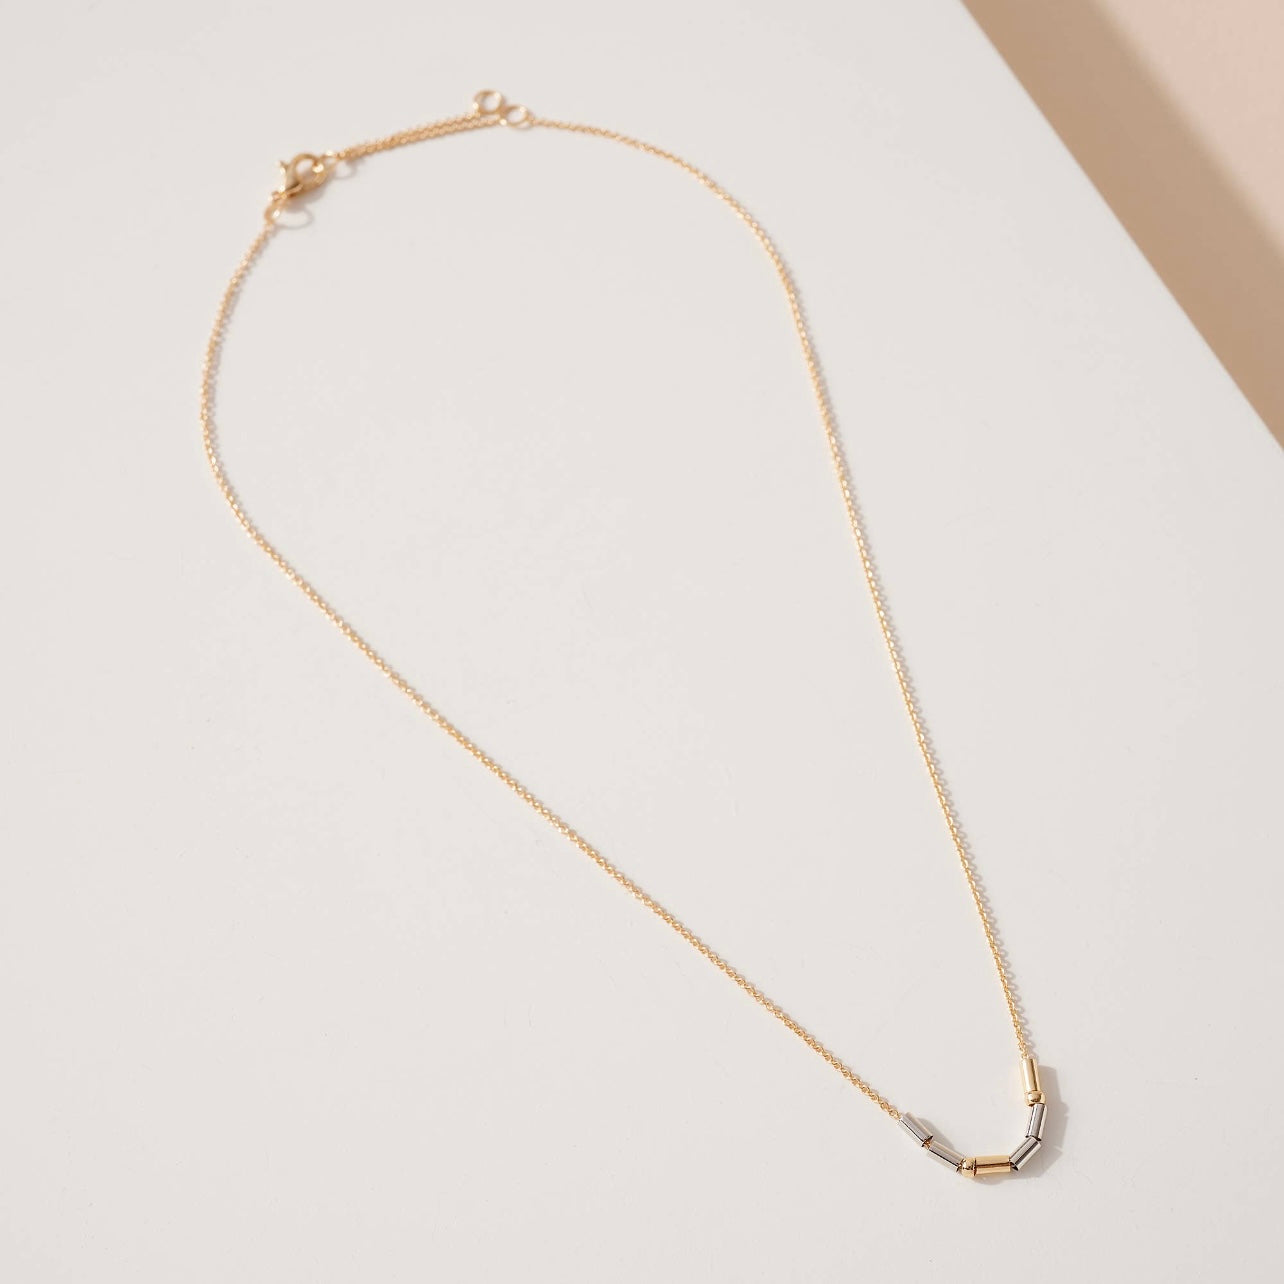 Buy MAMA Heart Necklace 18K Gold Plated, Layering Necklace, Bridesmaid,  Mothers Gifts, Dainty, Minimalist, Necklace for Women, Waterproof Online in  India - Etsy